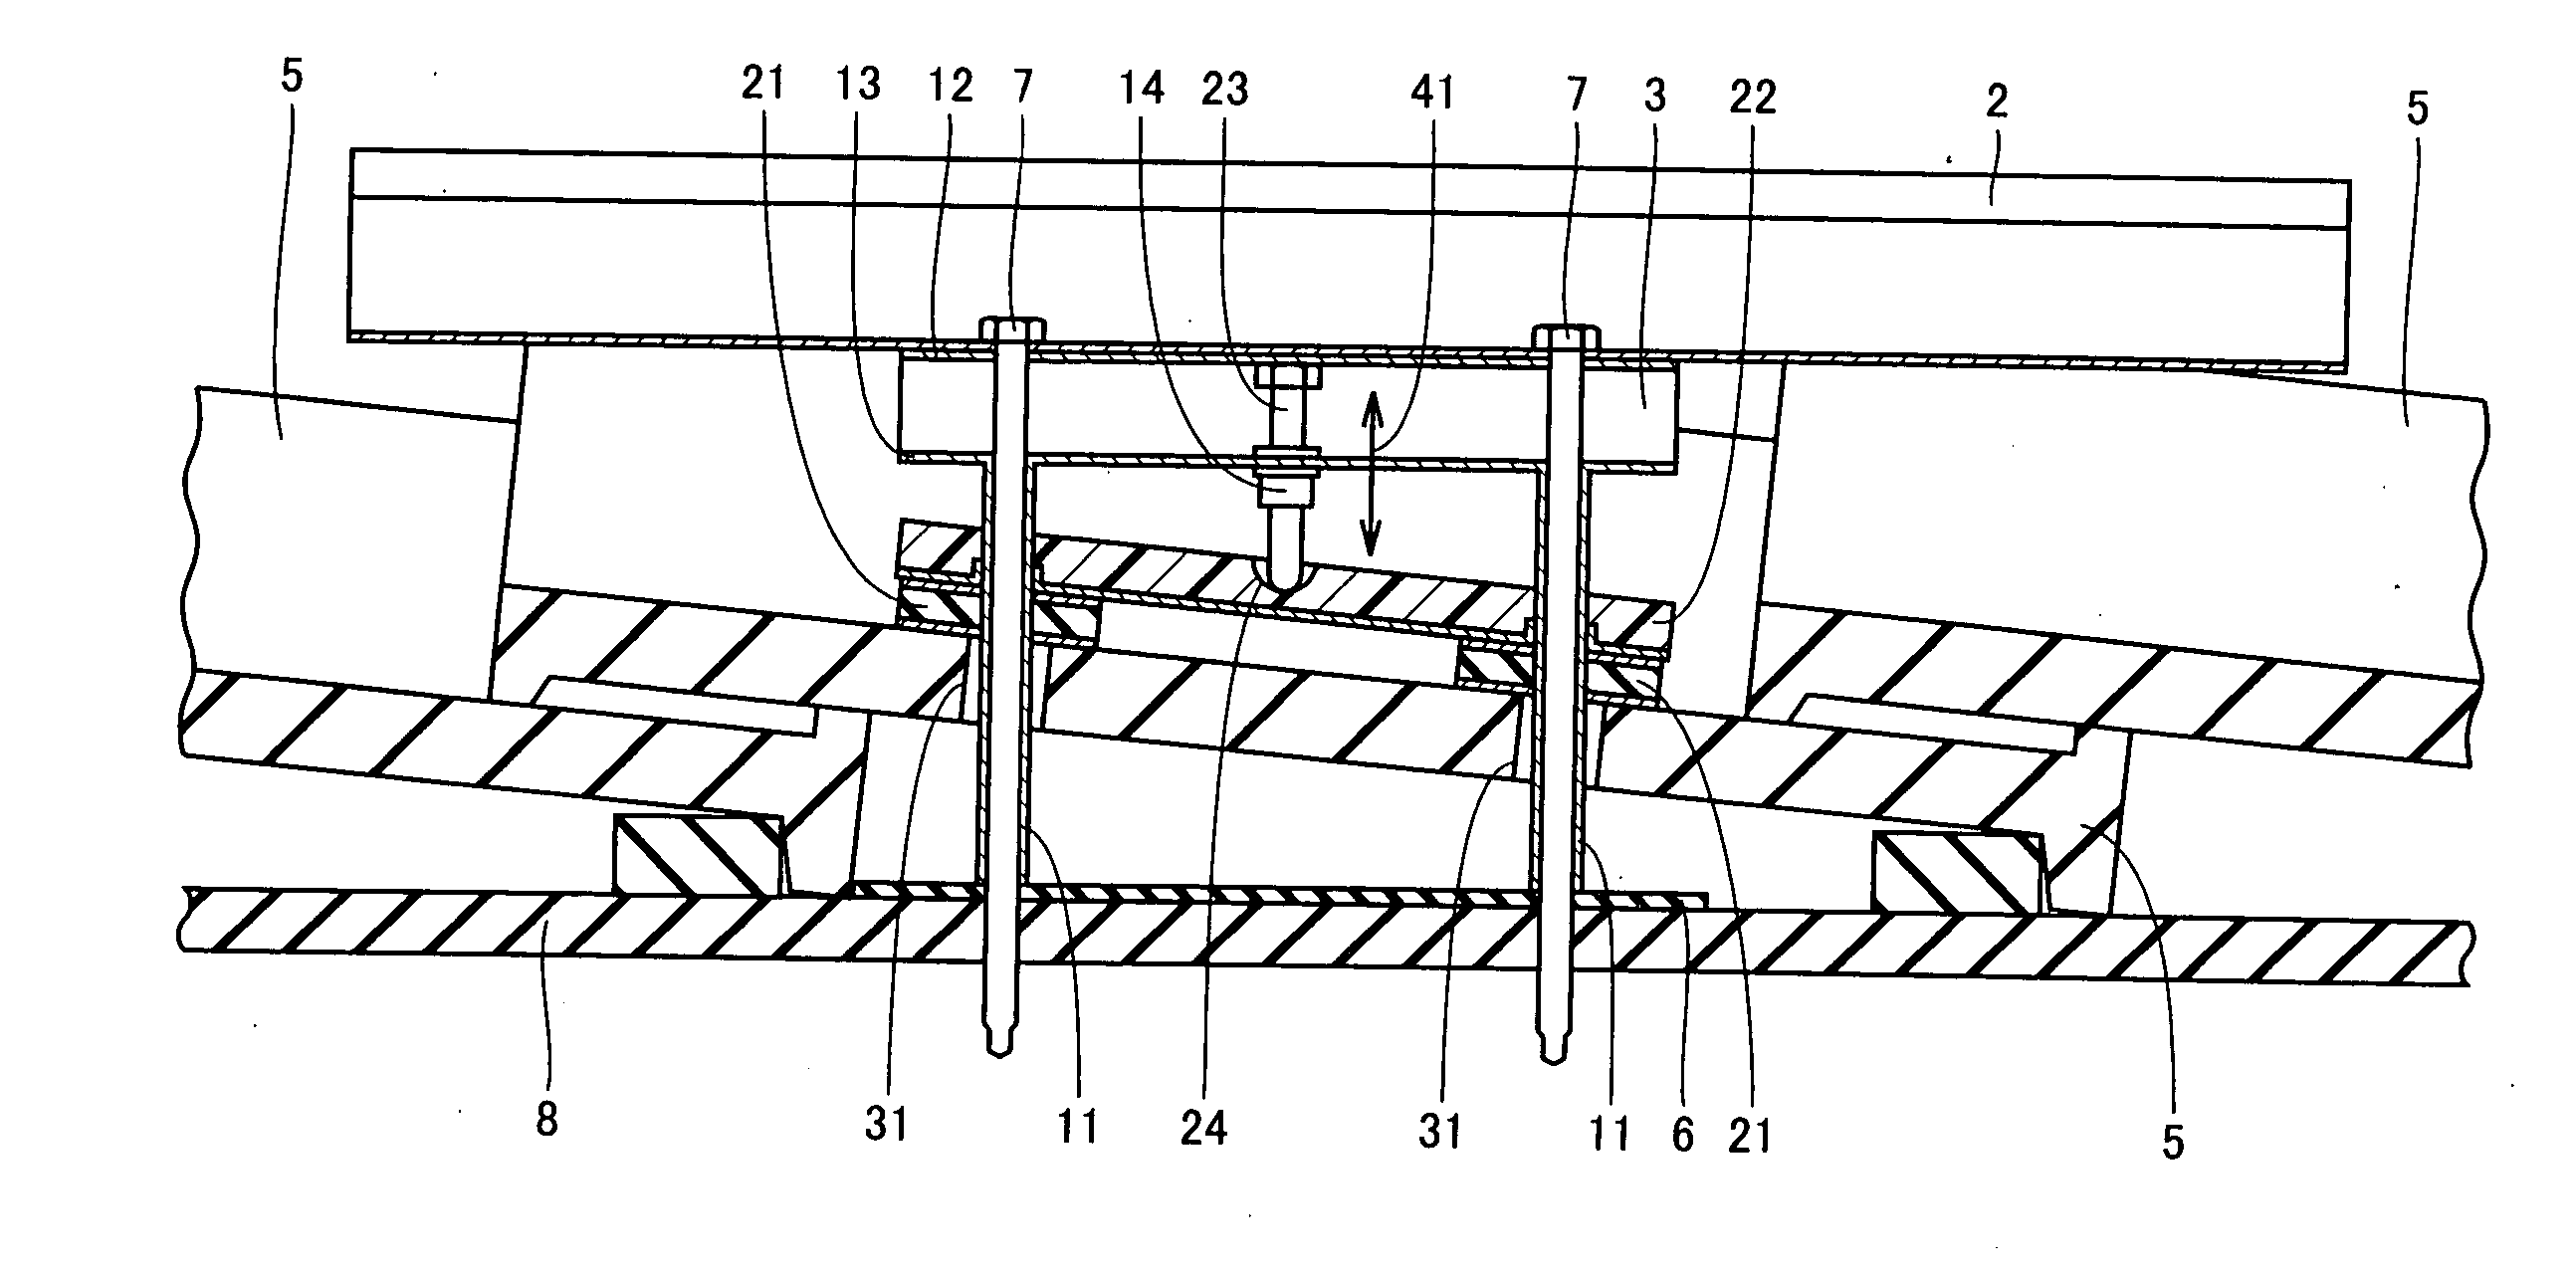 Structure fixing apparatus including support device